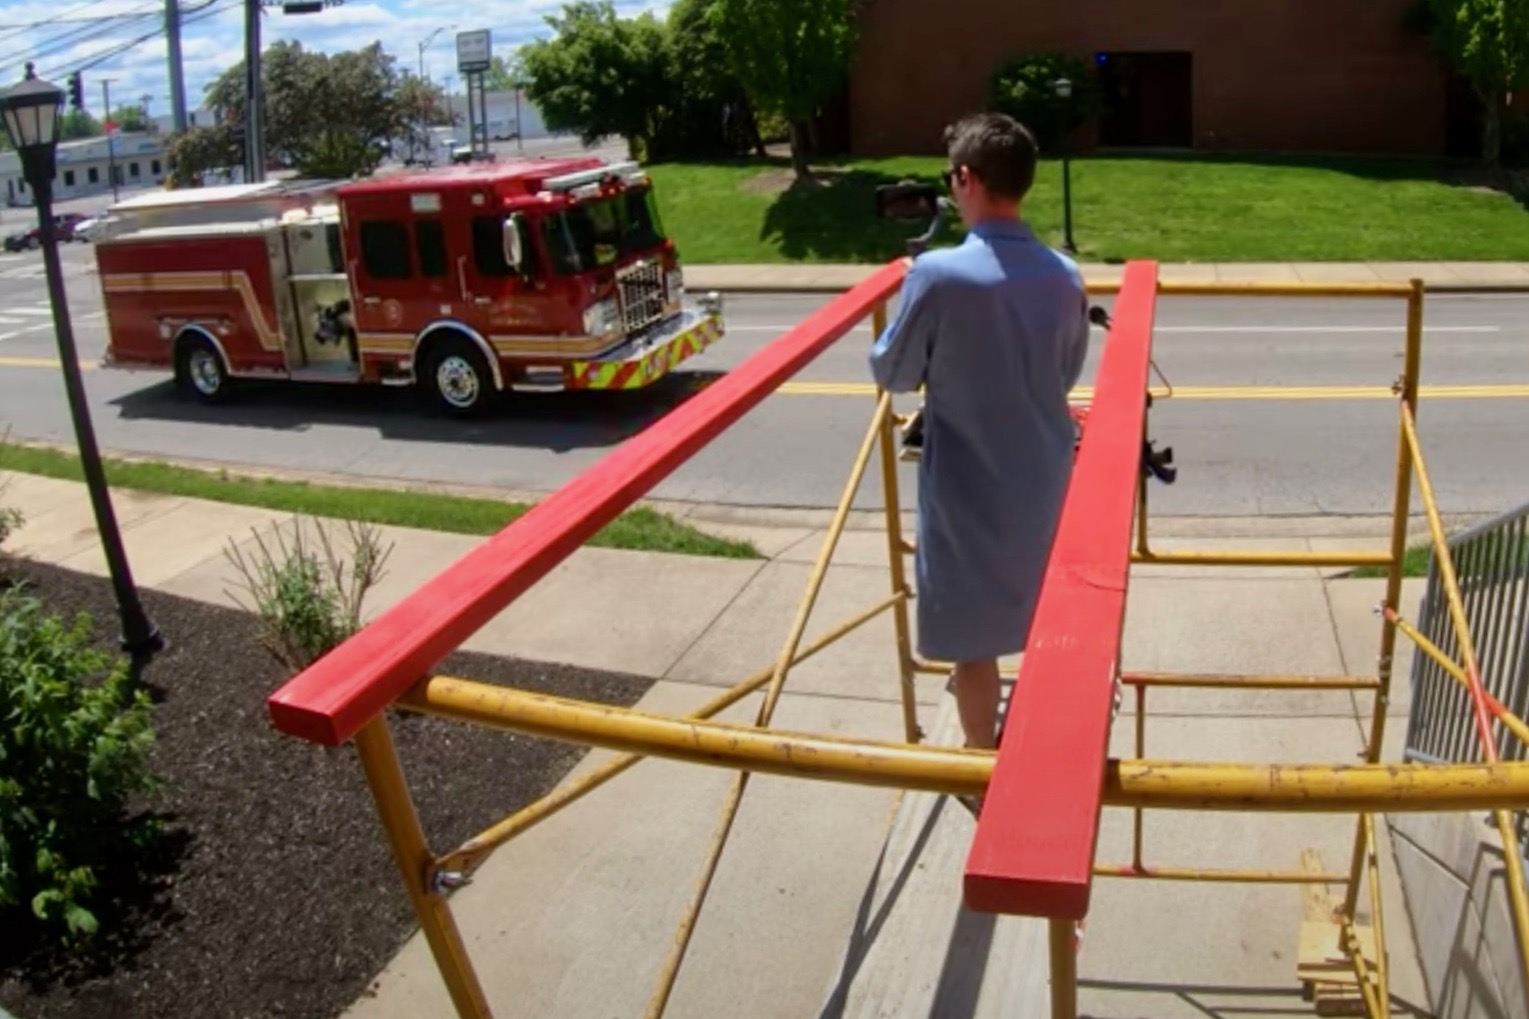 A fire truck then blared its horn and flashed into the screen, demonstrating the Doppler effect – an increase and decrease of sound waves as the source approaches then leaves an observer – to viewers.